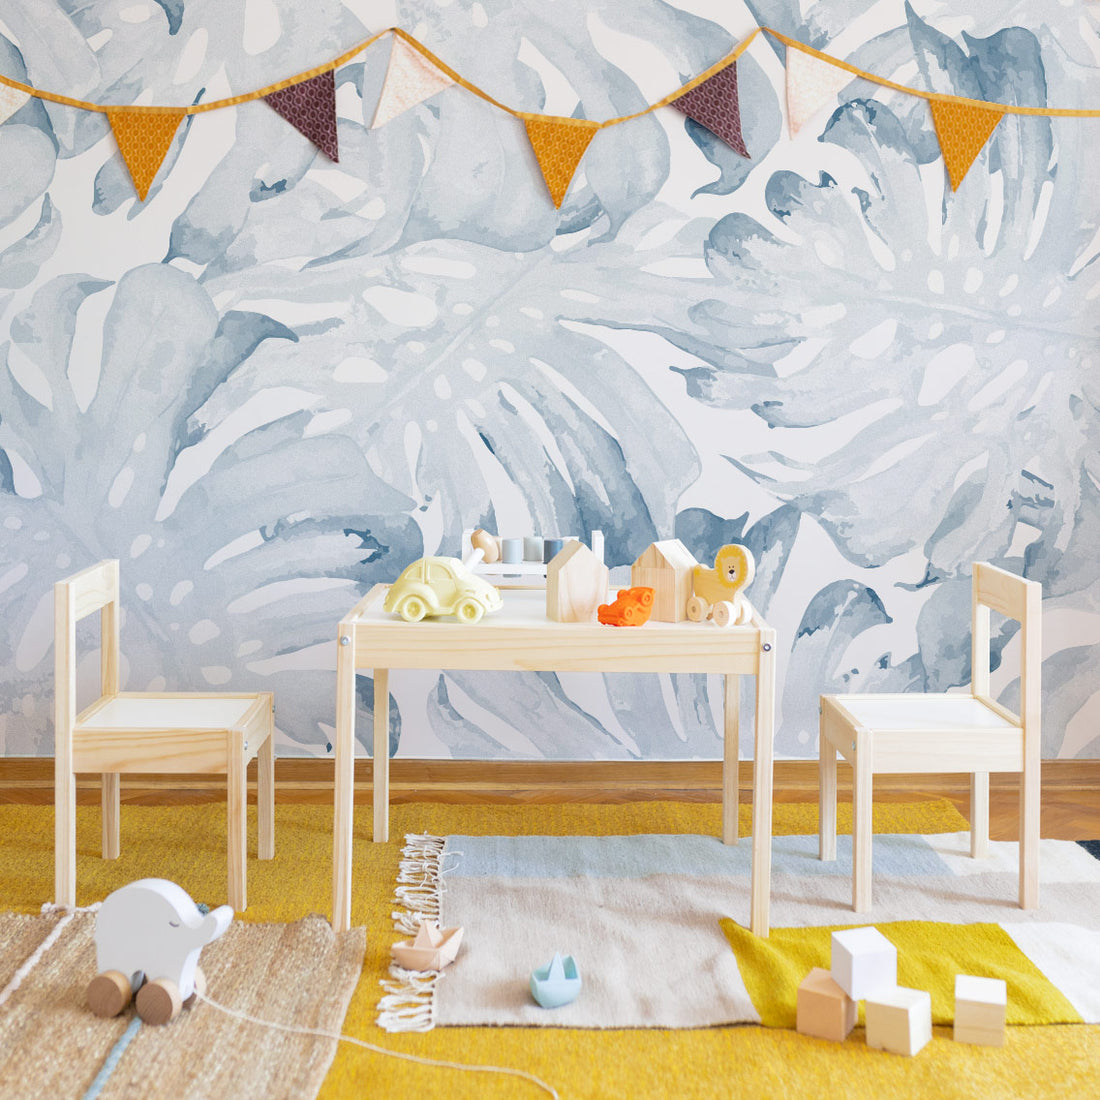 Coastal eclectic style kids playroom interior with oversized tropical wall mural